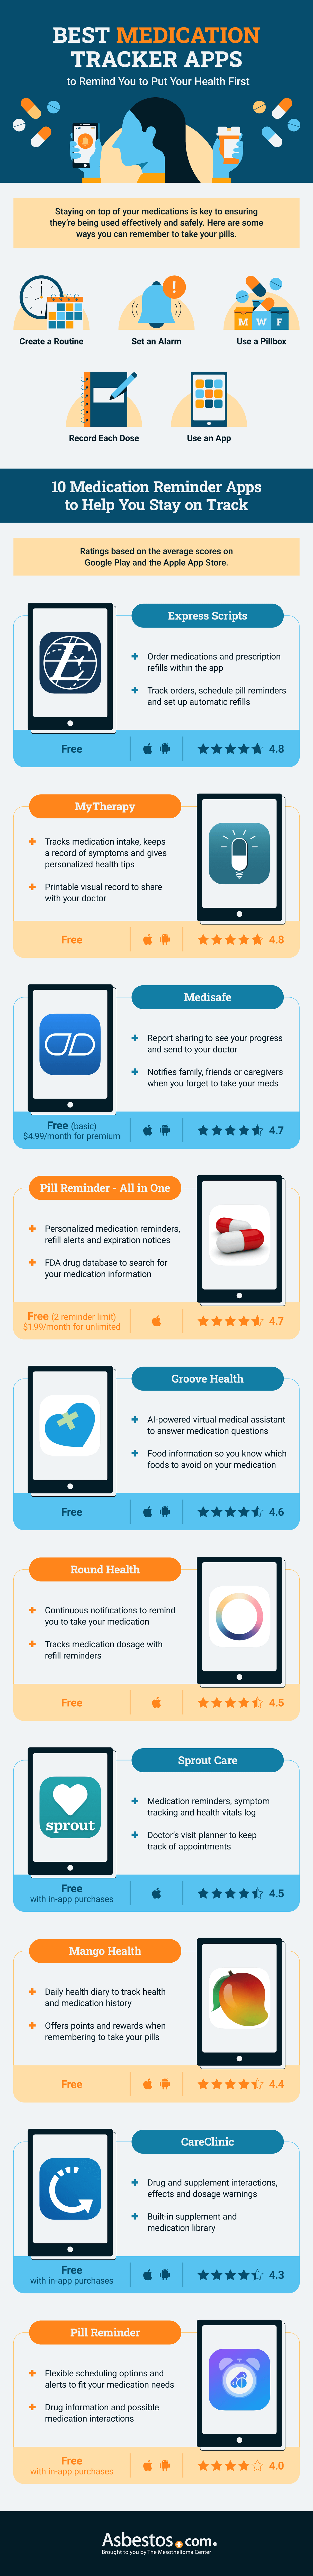 Best Medication Tracker Apps infographic